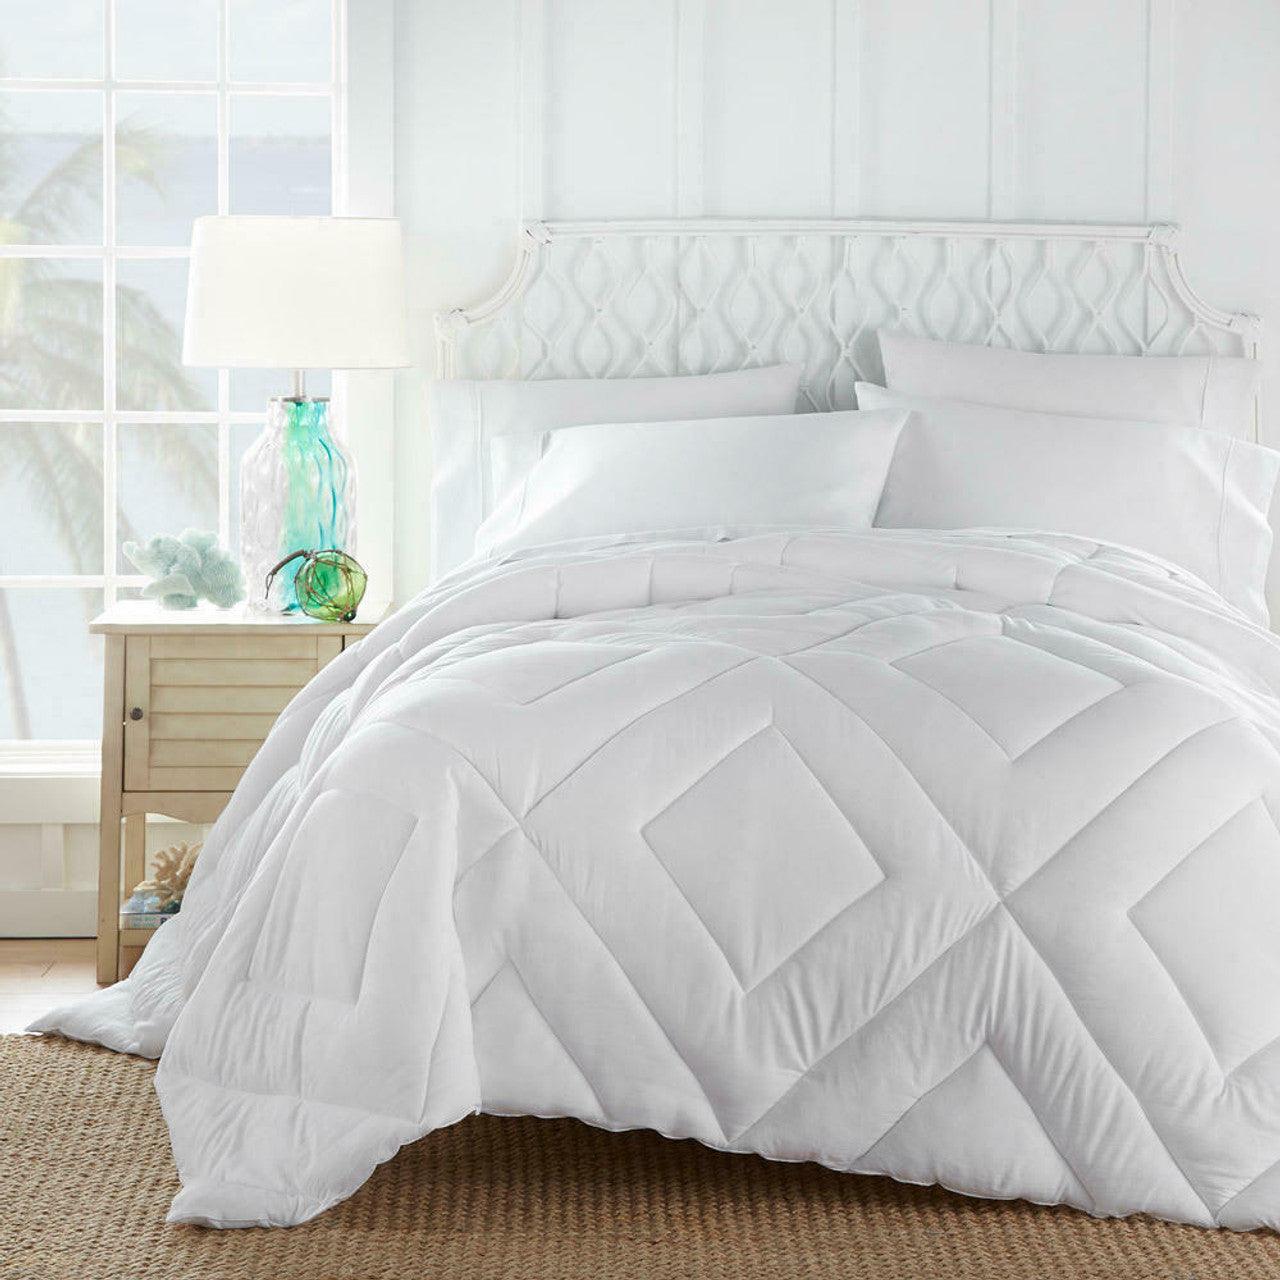 Tommy Bahama All Season Relaxed Comfort Butter Soft Down Alternative Comforter (Hypoallergenic)